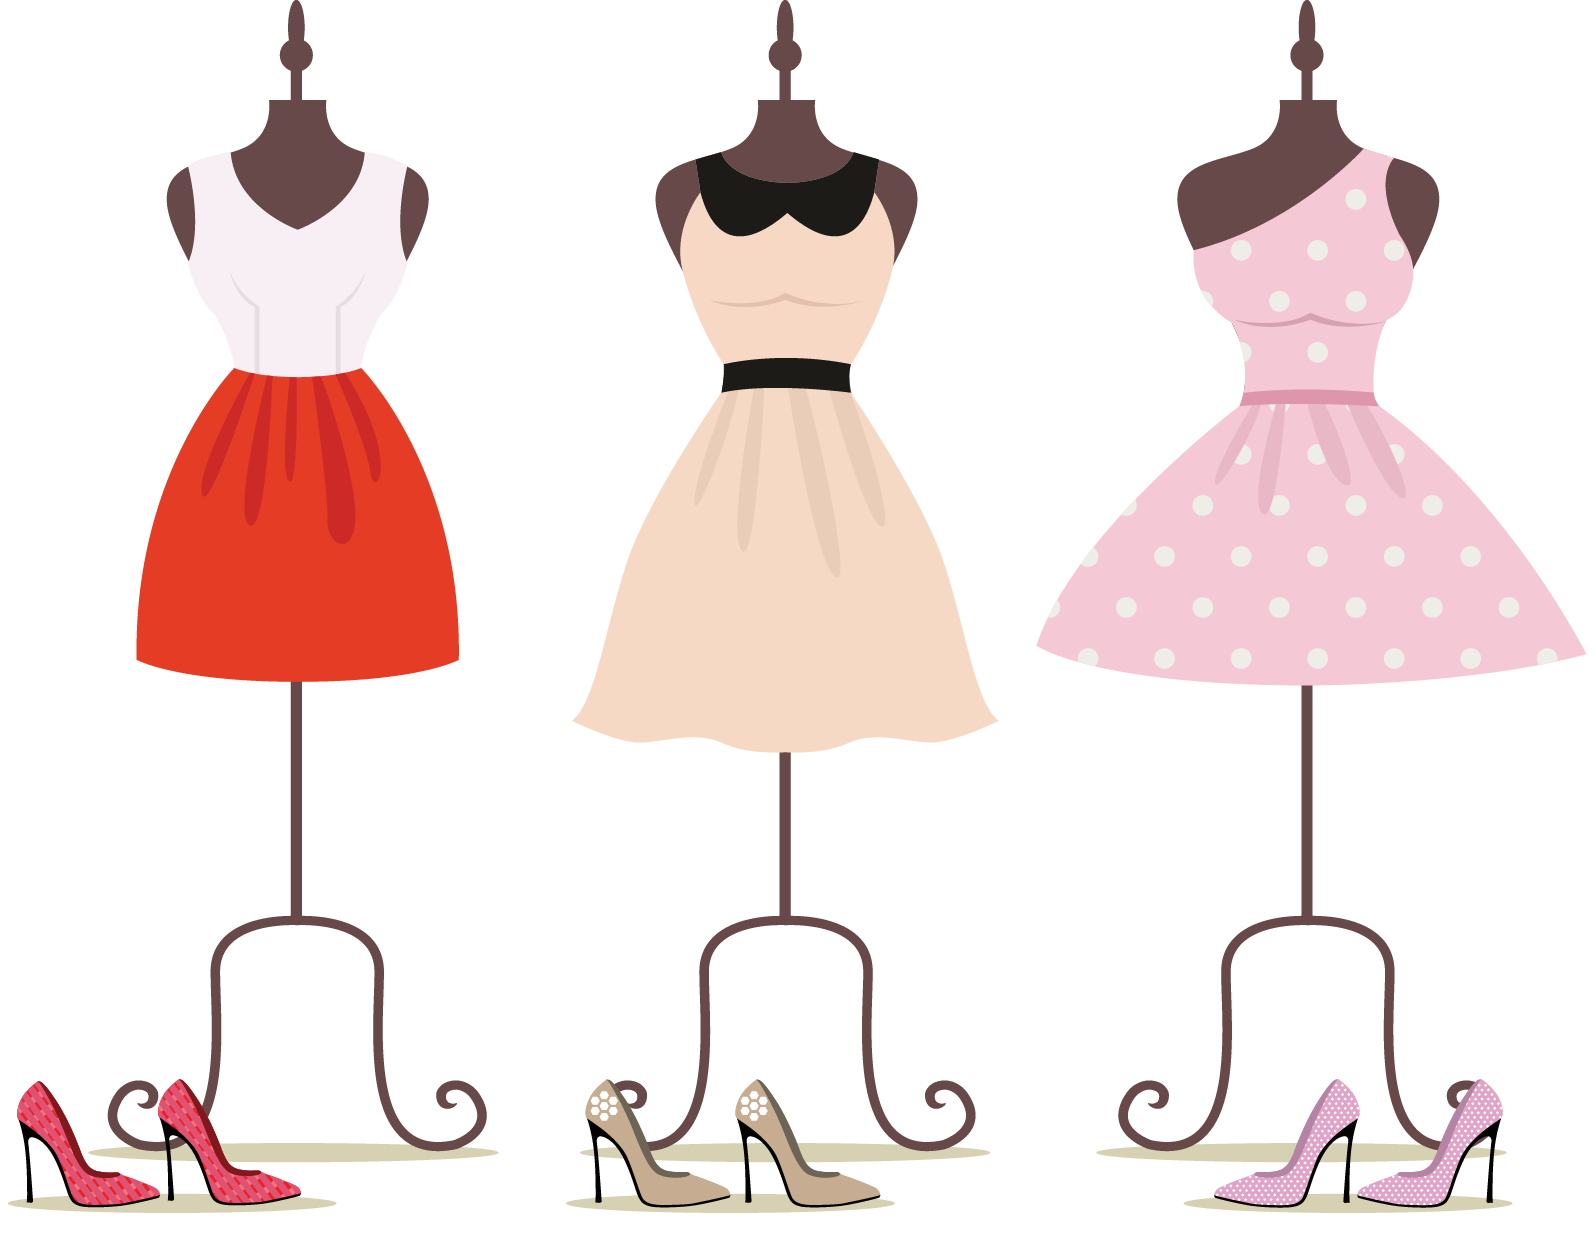 Dress clothing royalty free. Clipart clothes mannequin